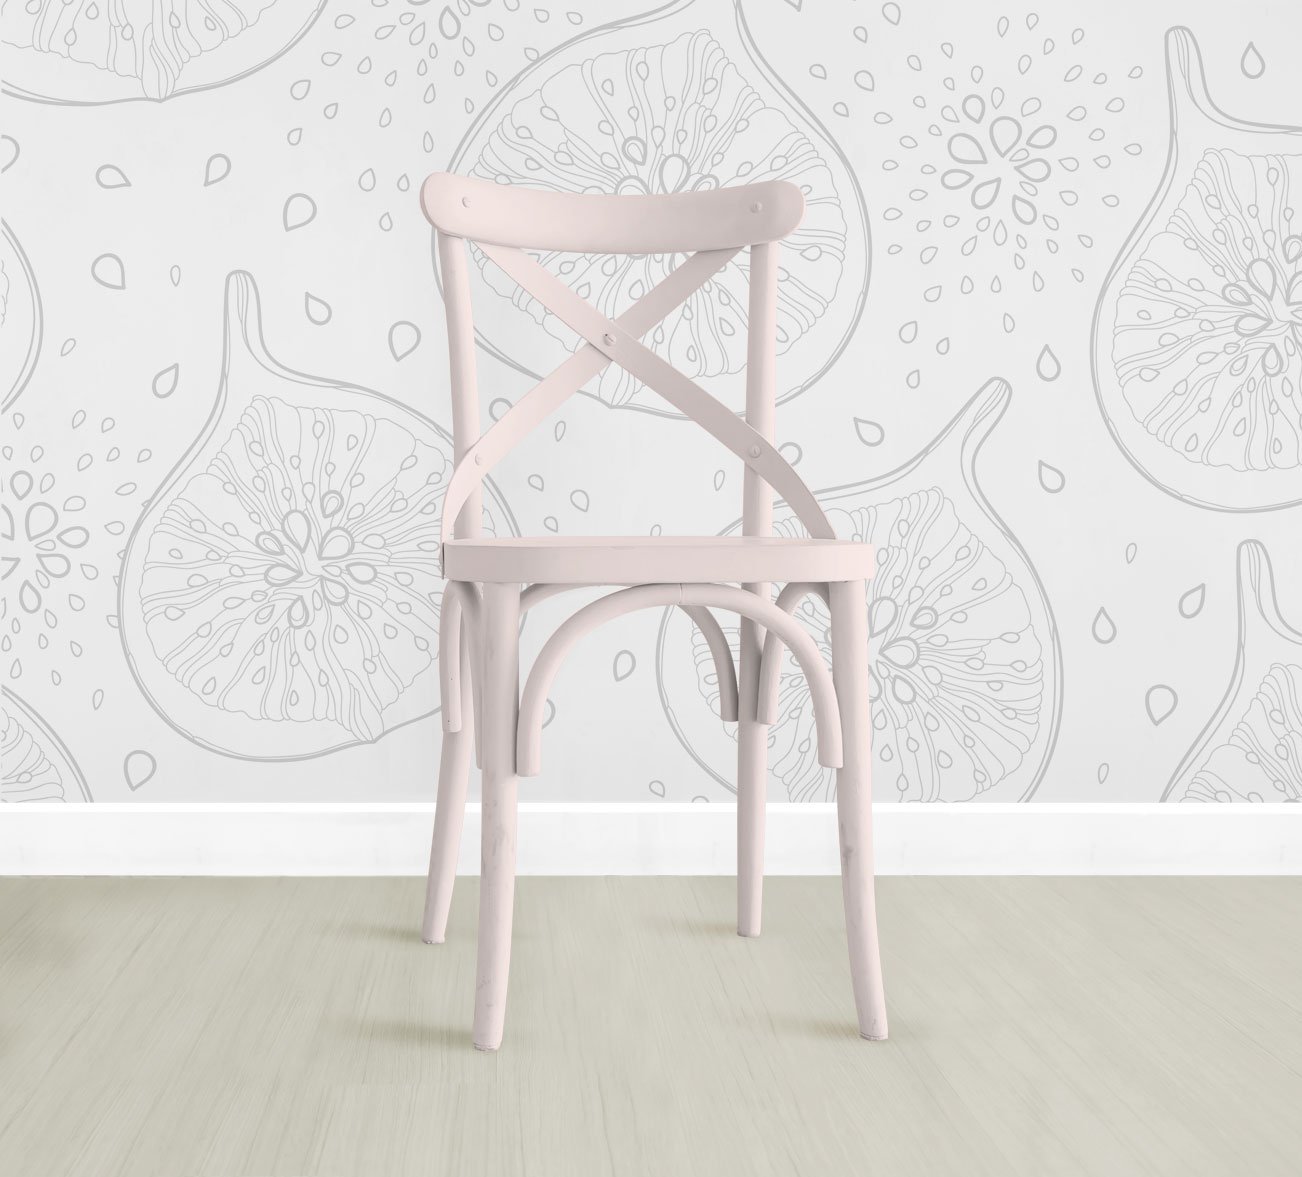 POSIE Recolor chalk paint CHAIR Recolor Recycled Paint